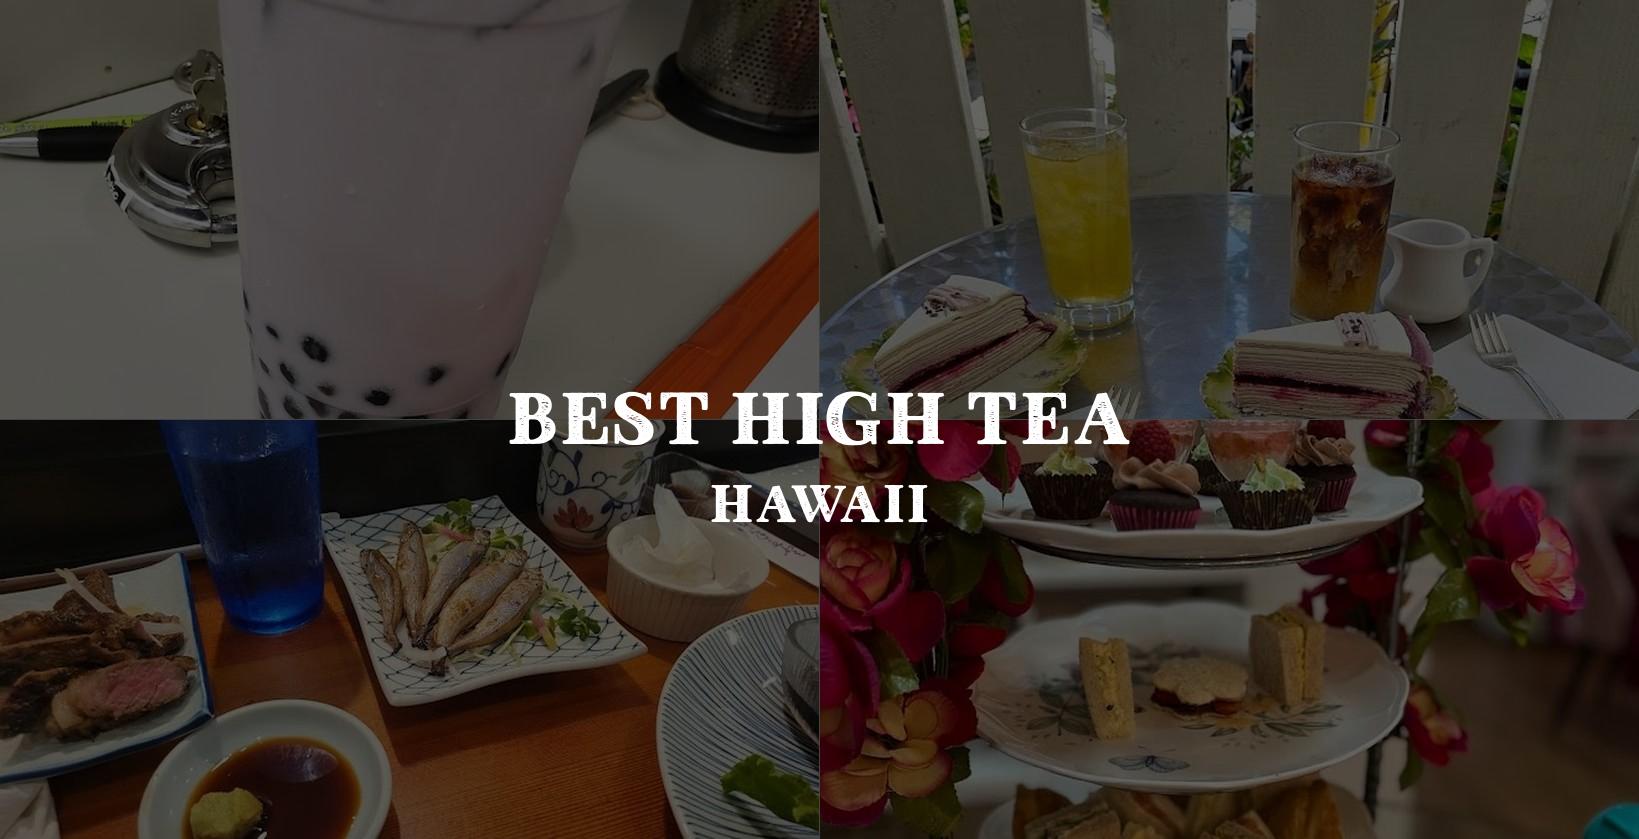 Choosing the perfect spot for high tea in Hawaii